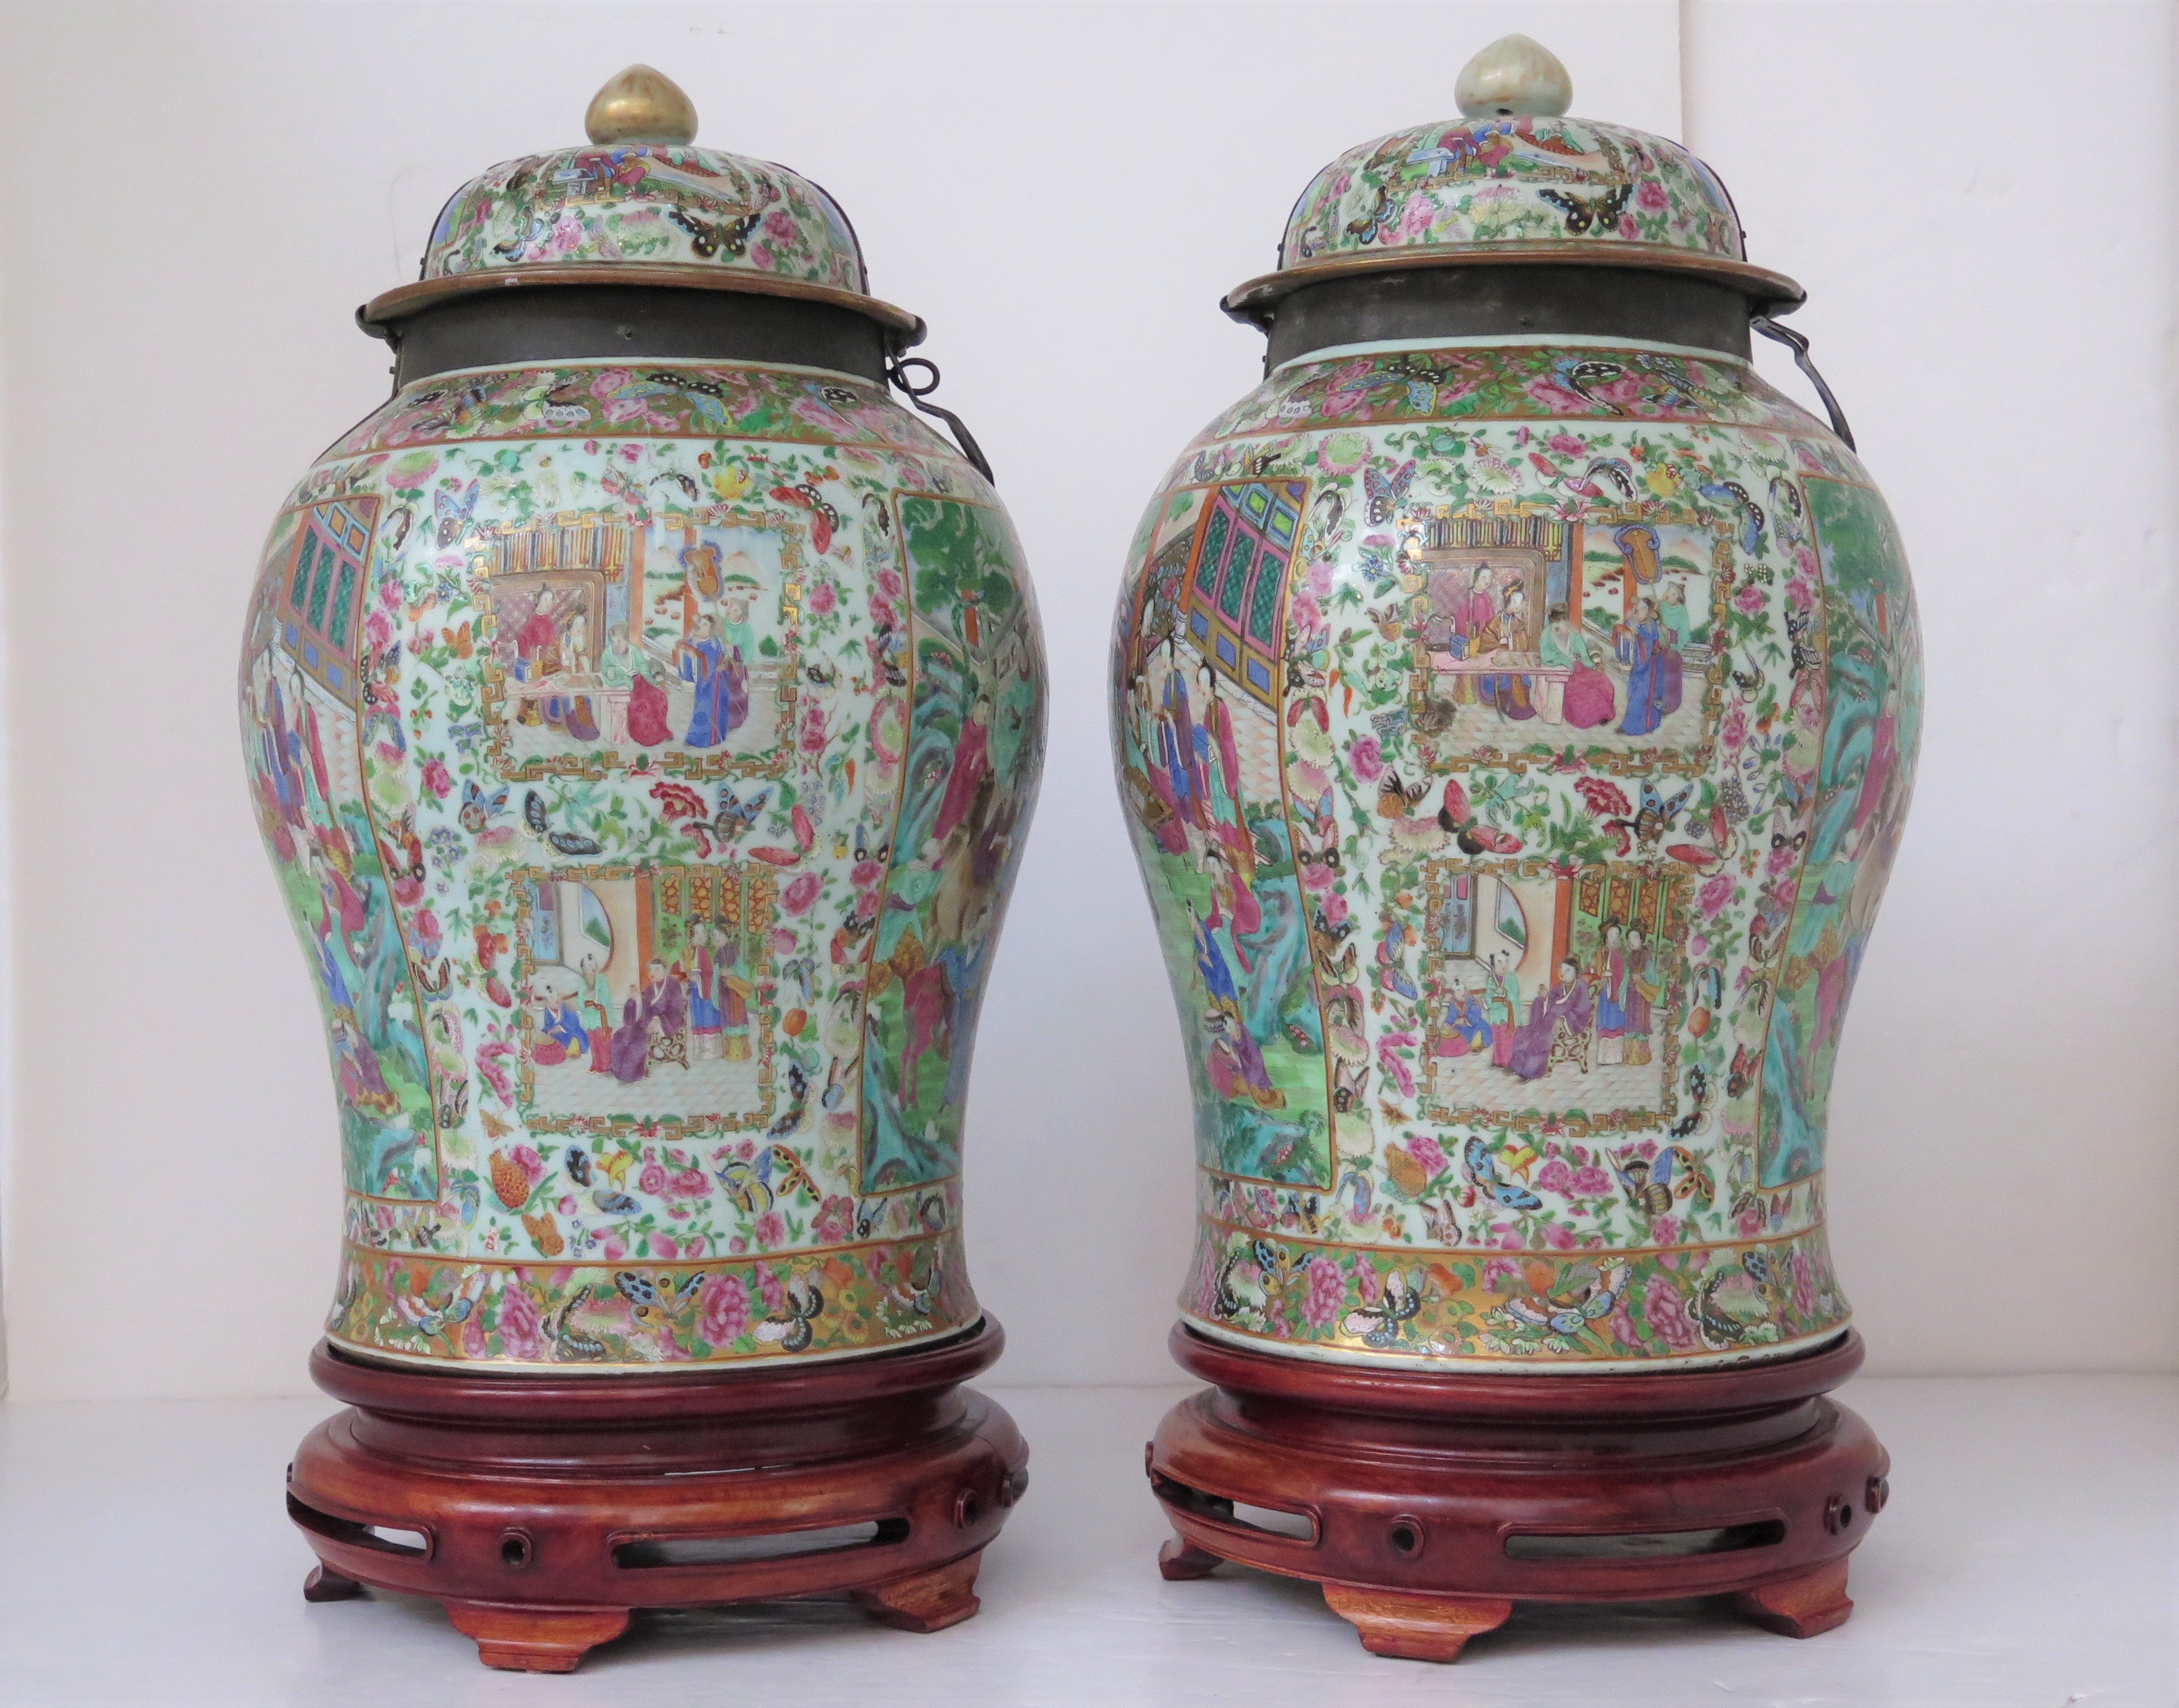 A Pair of Late 18th-Early 19th Century Chinese Lidded Jars  C. 1790, China